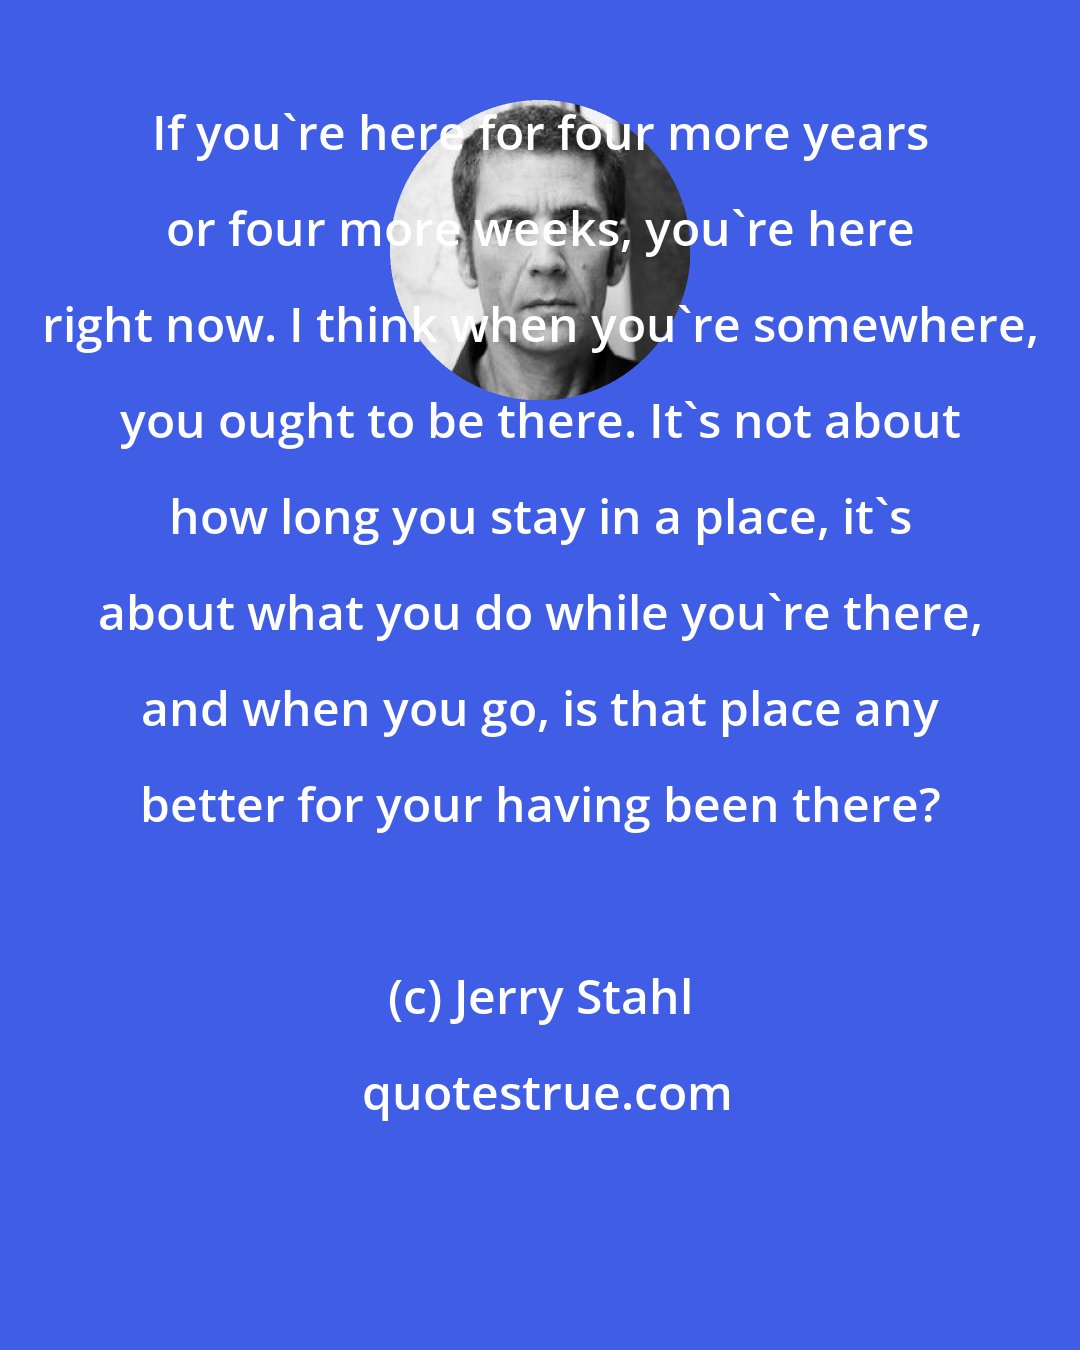 Jerry Stahl: If you're here for four more years or four more weeks, you're here right now. I think when you're somewhere, you ought to be there. It's not about how long you stay in a place, it's about what you do while you're there, and when you go, is that place any better for your having been there?